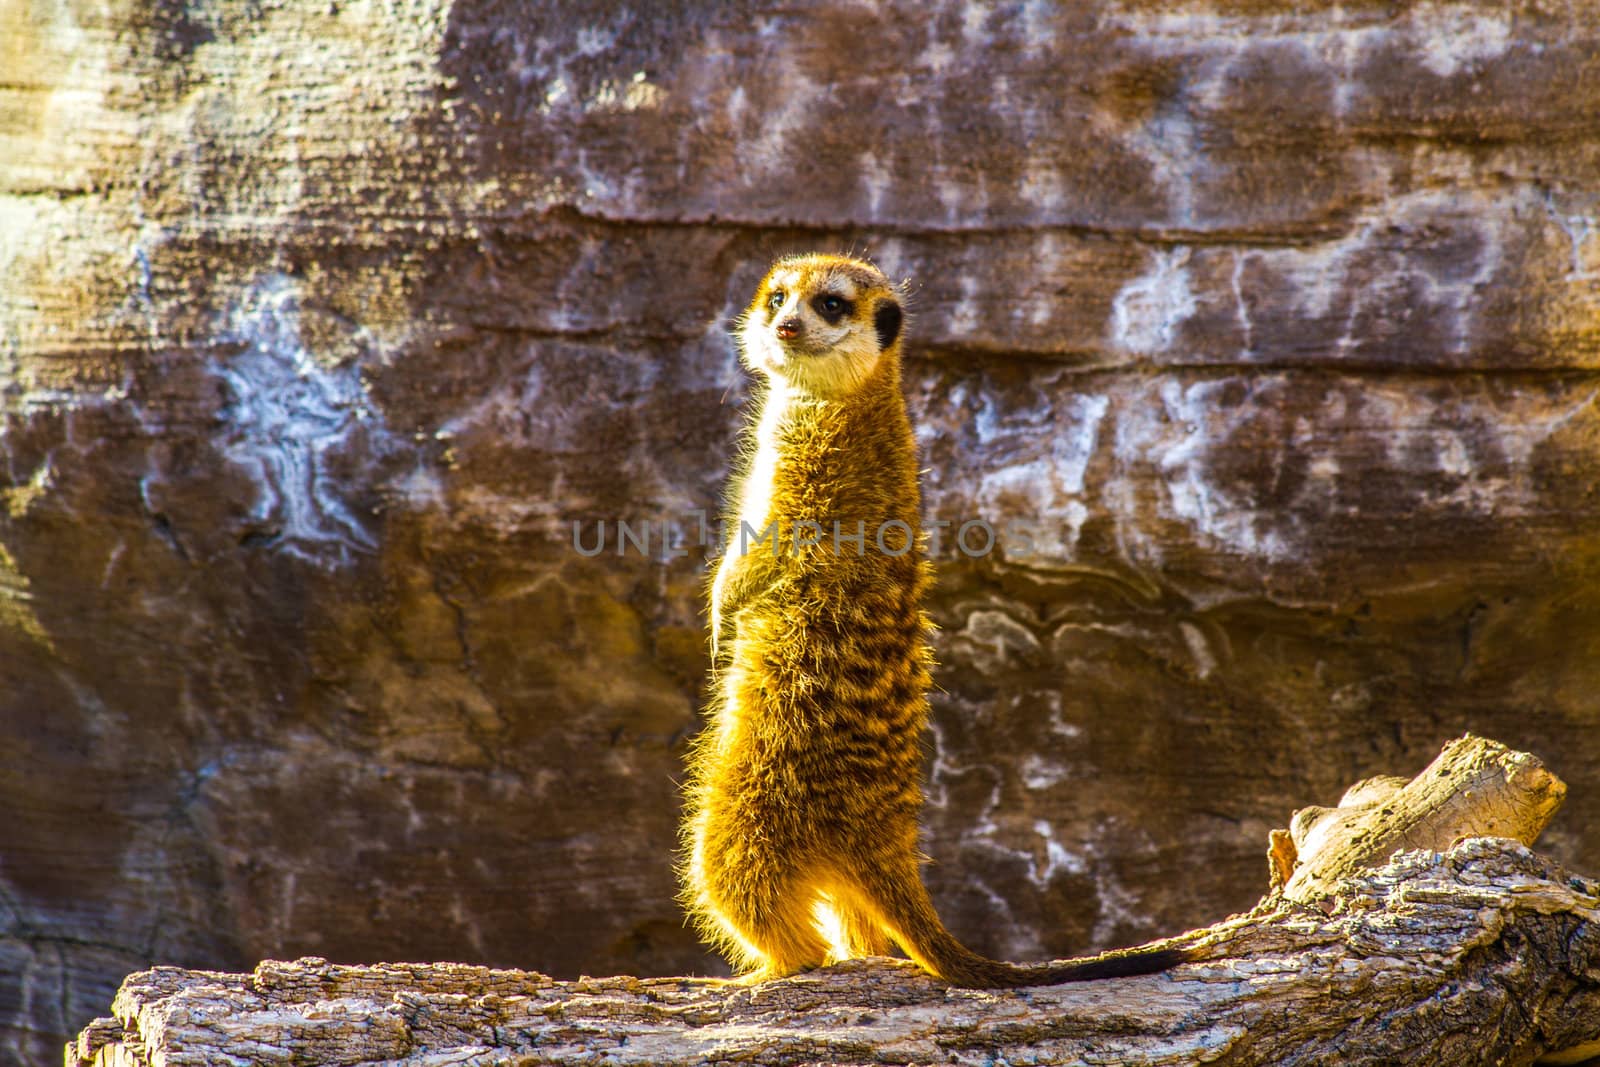 A Meerkat stands and turns to look at the camera.